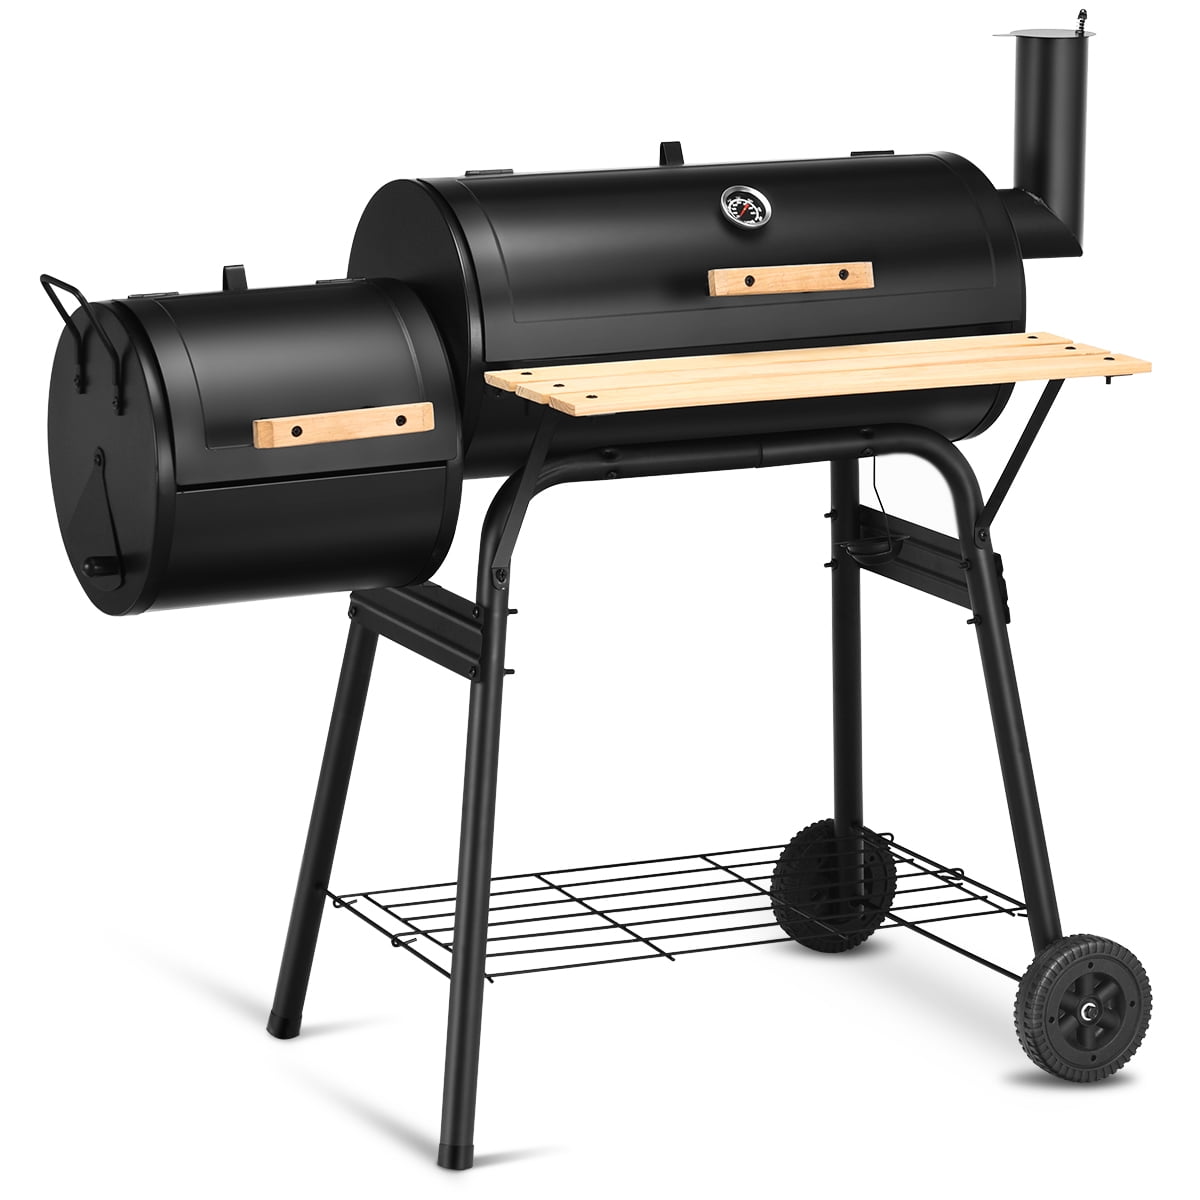 Charcoal Water Smoker Grill Outdoor BBQ Barbecue Cooker Backyard Camping Patio 